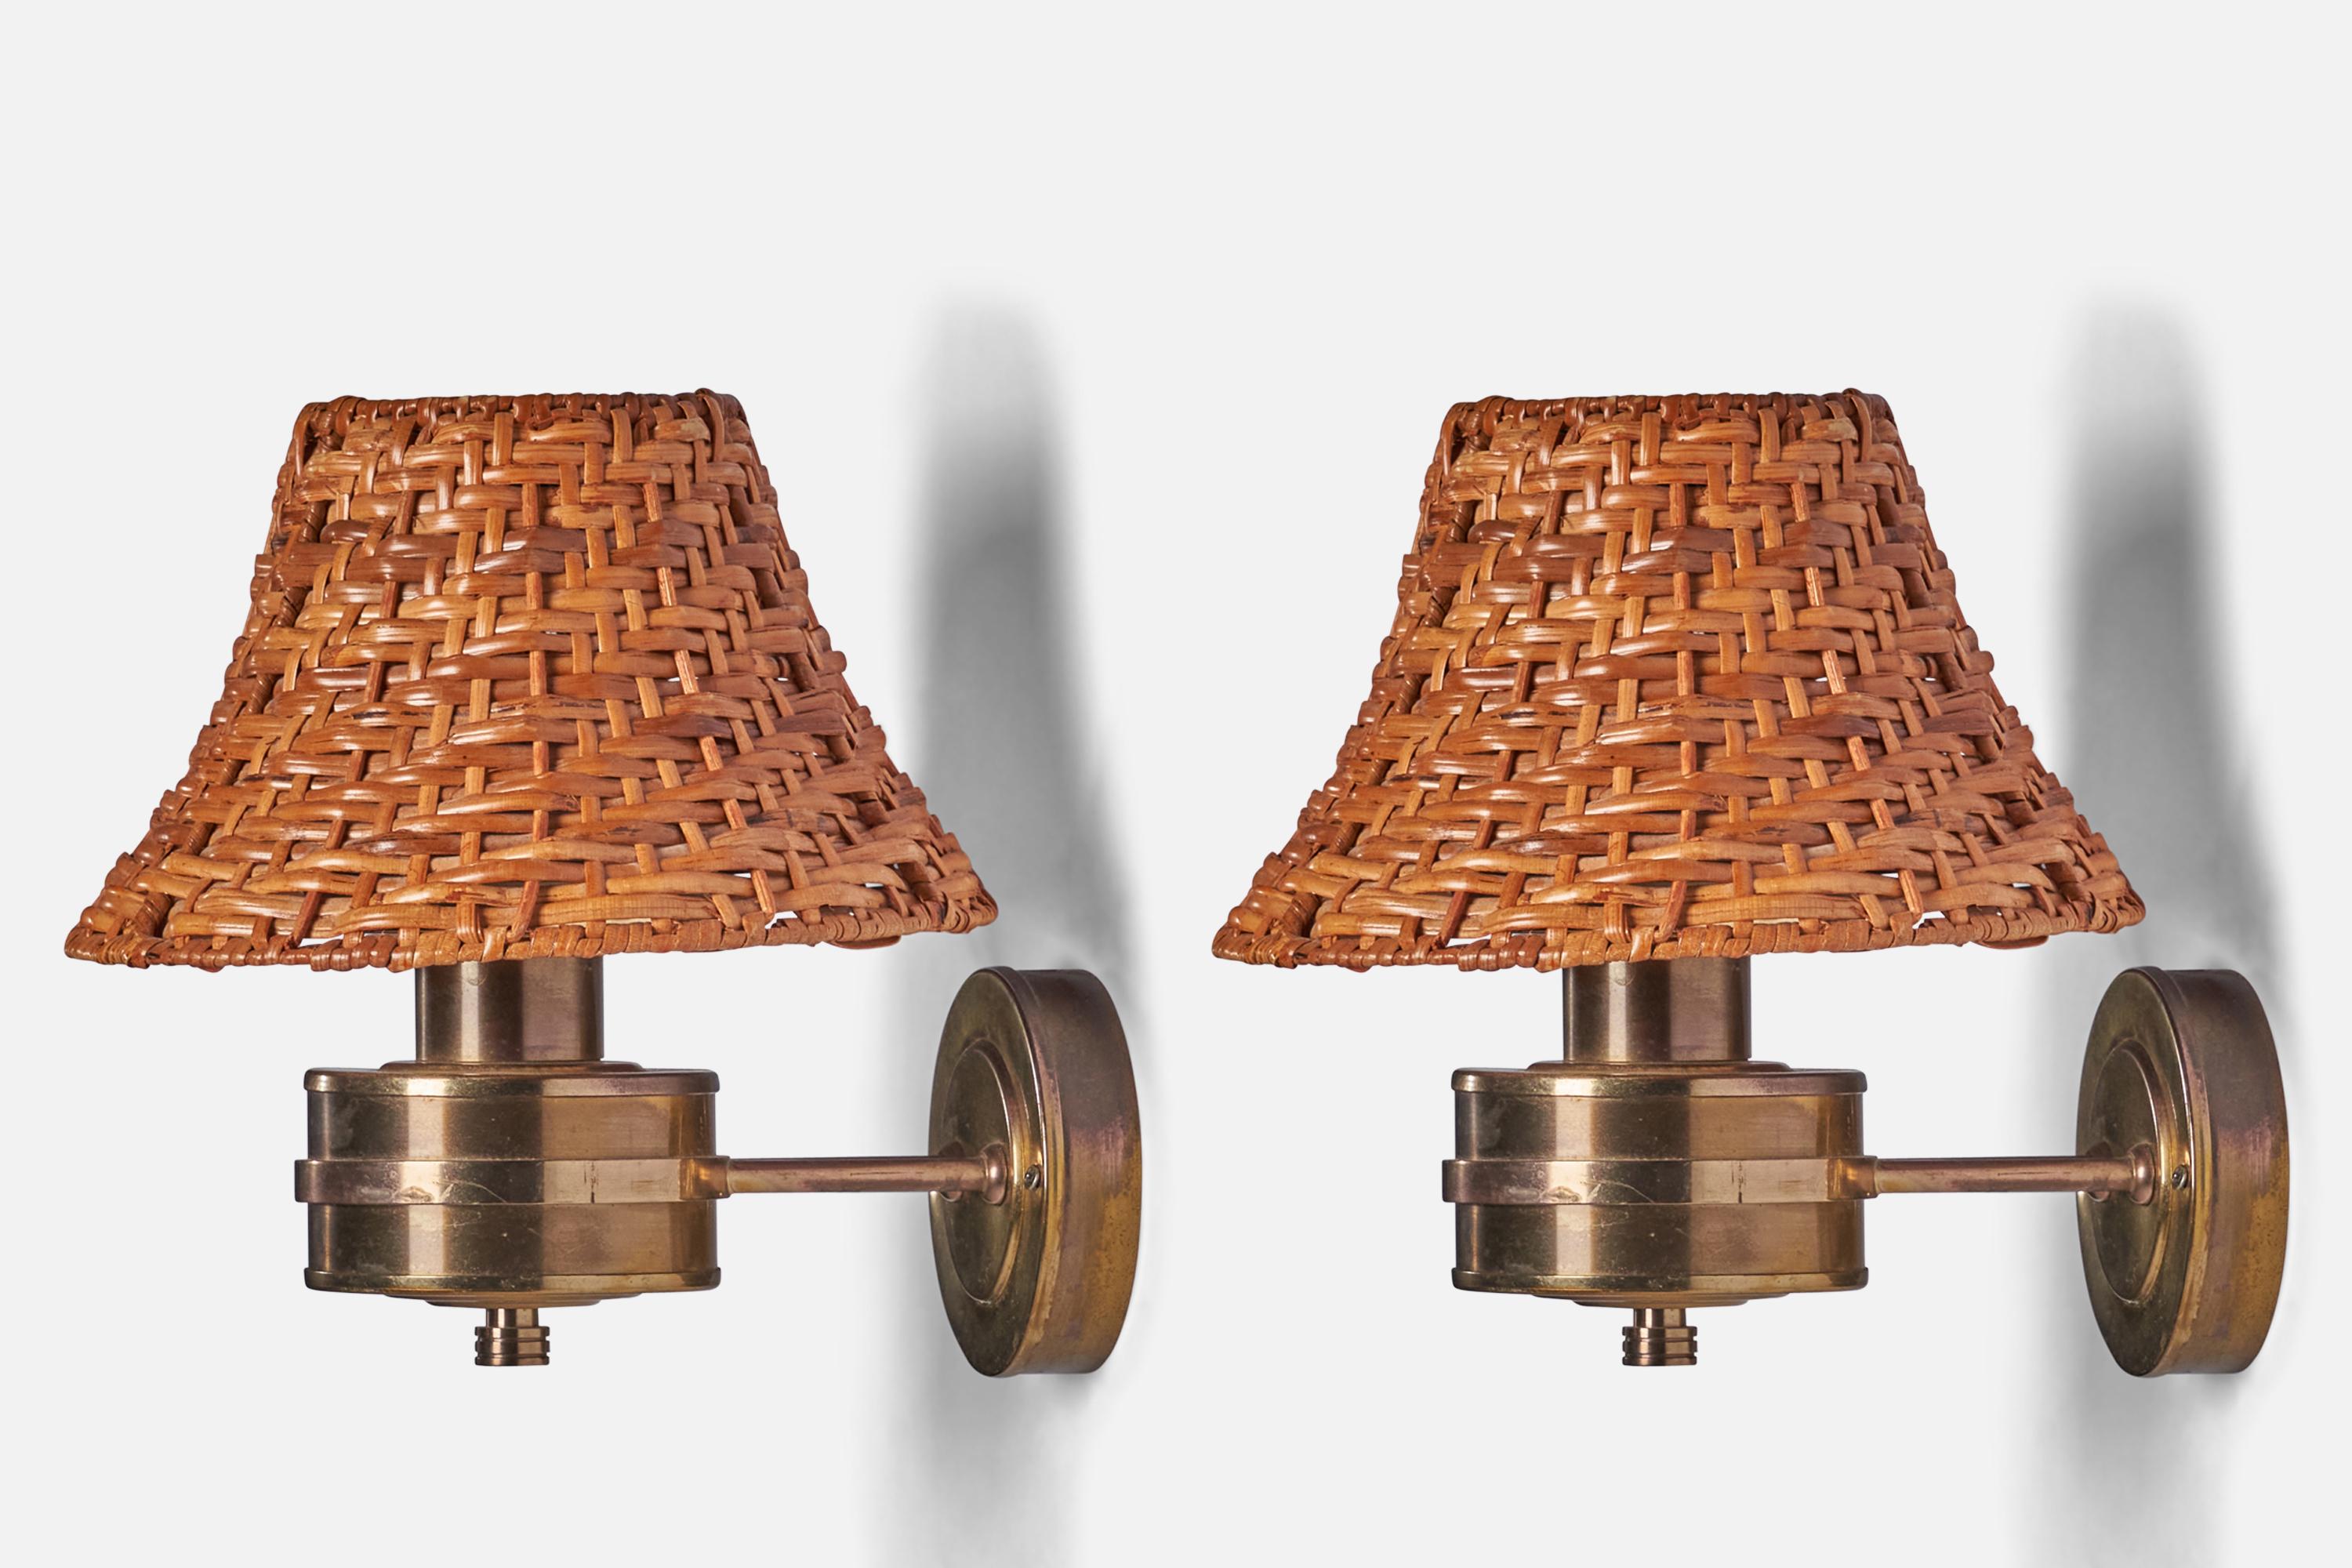 A pair of brass and rattan wall lights designed and produced by Tyringe Konsthantverk, Sweden, 1970s

Overall Dimensions (inches): 9.5” H x 8.75” W x 10.25” D
Back Plate Dimensions (inches): 3.75” Diameter x 0.9” D
Bulb Specifications: E-26